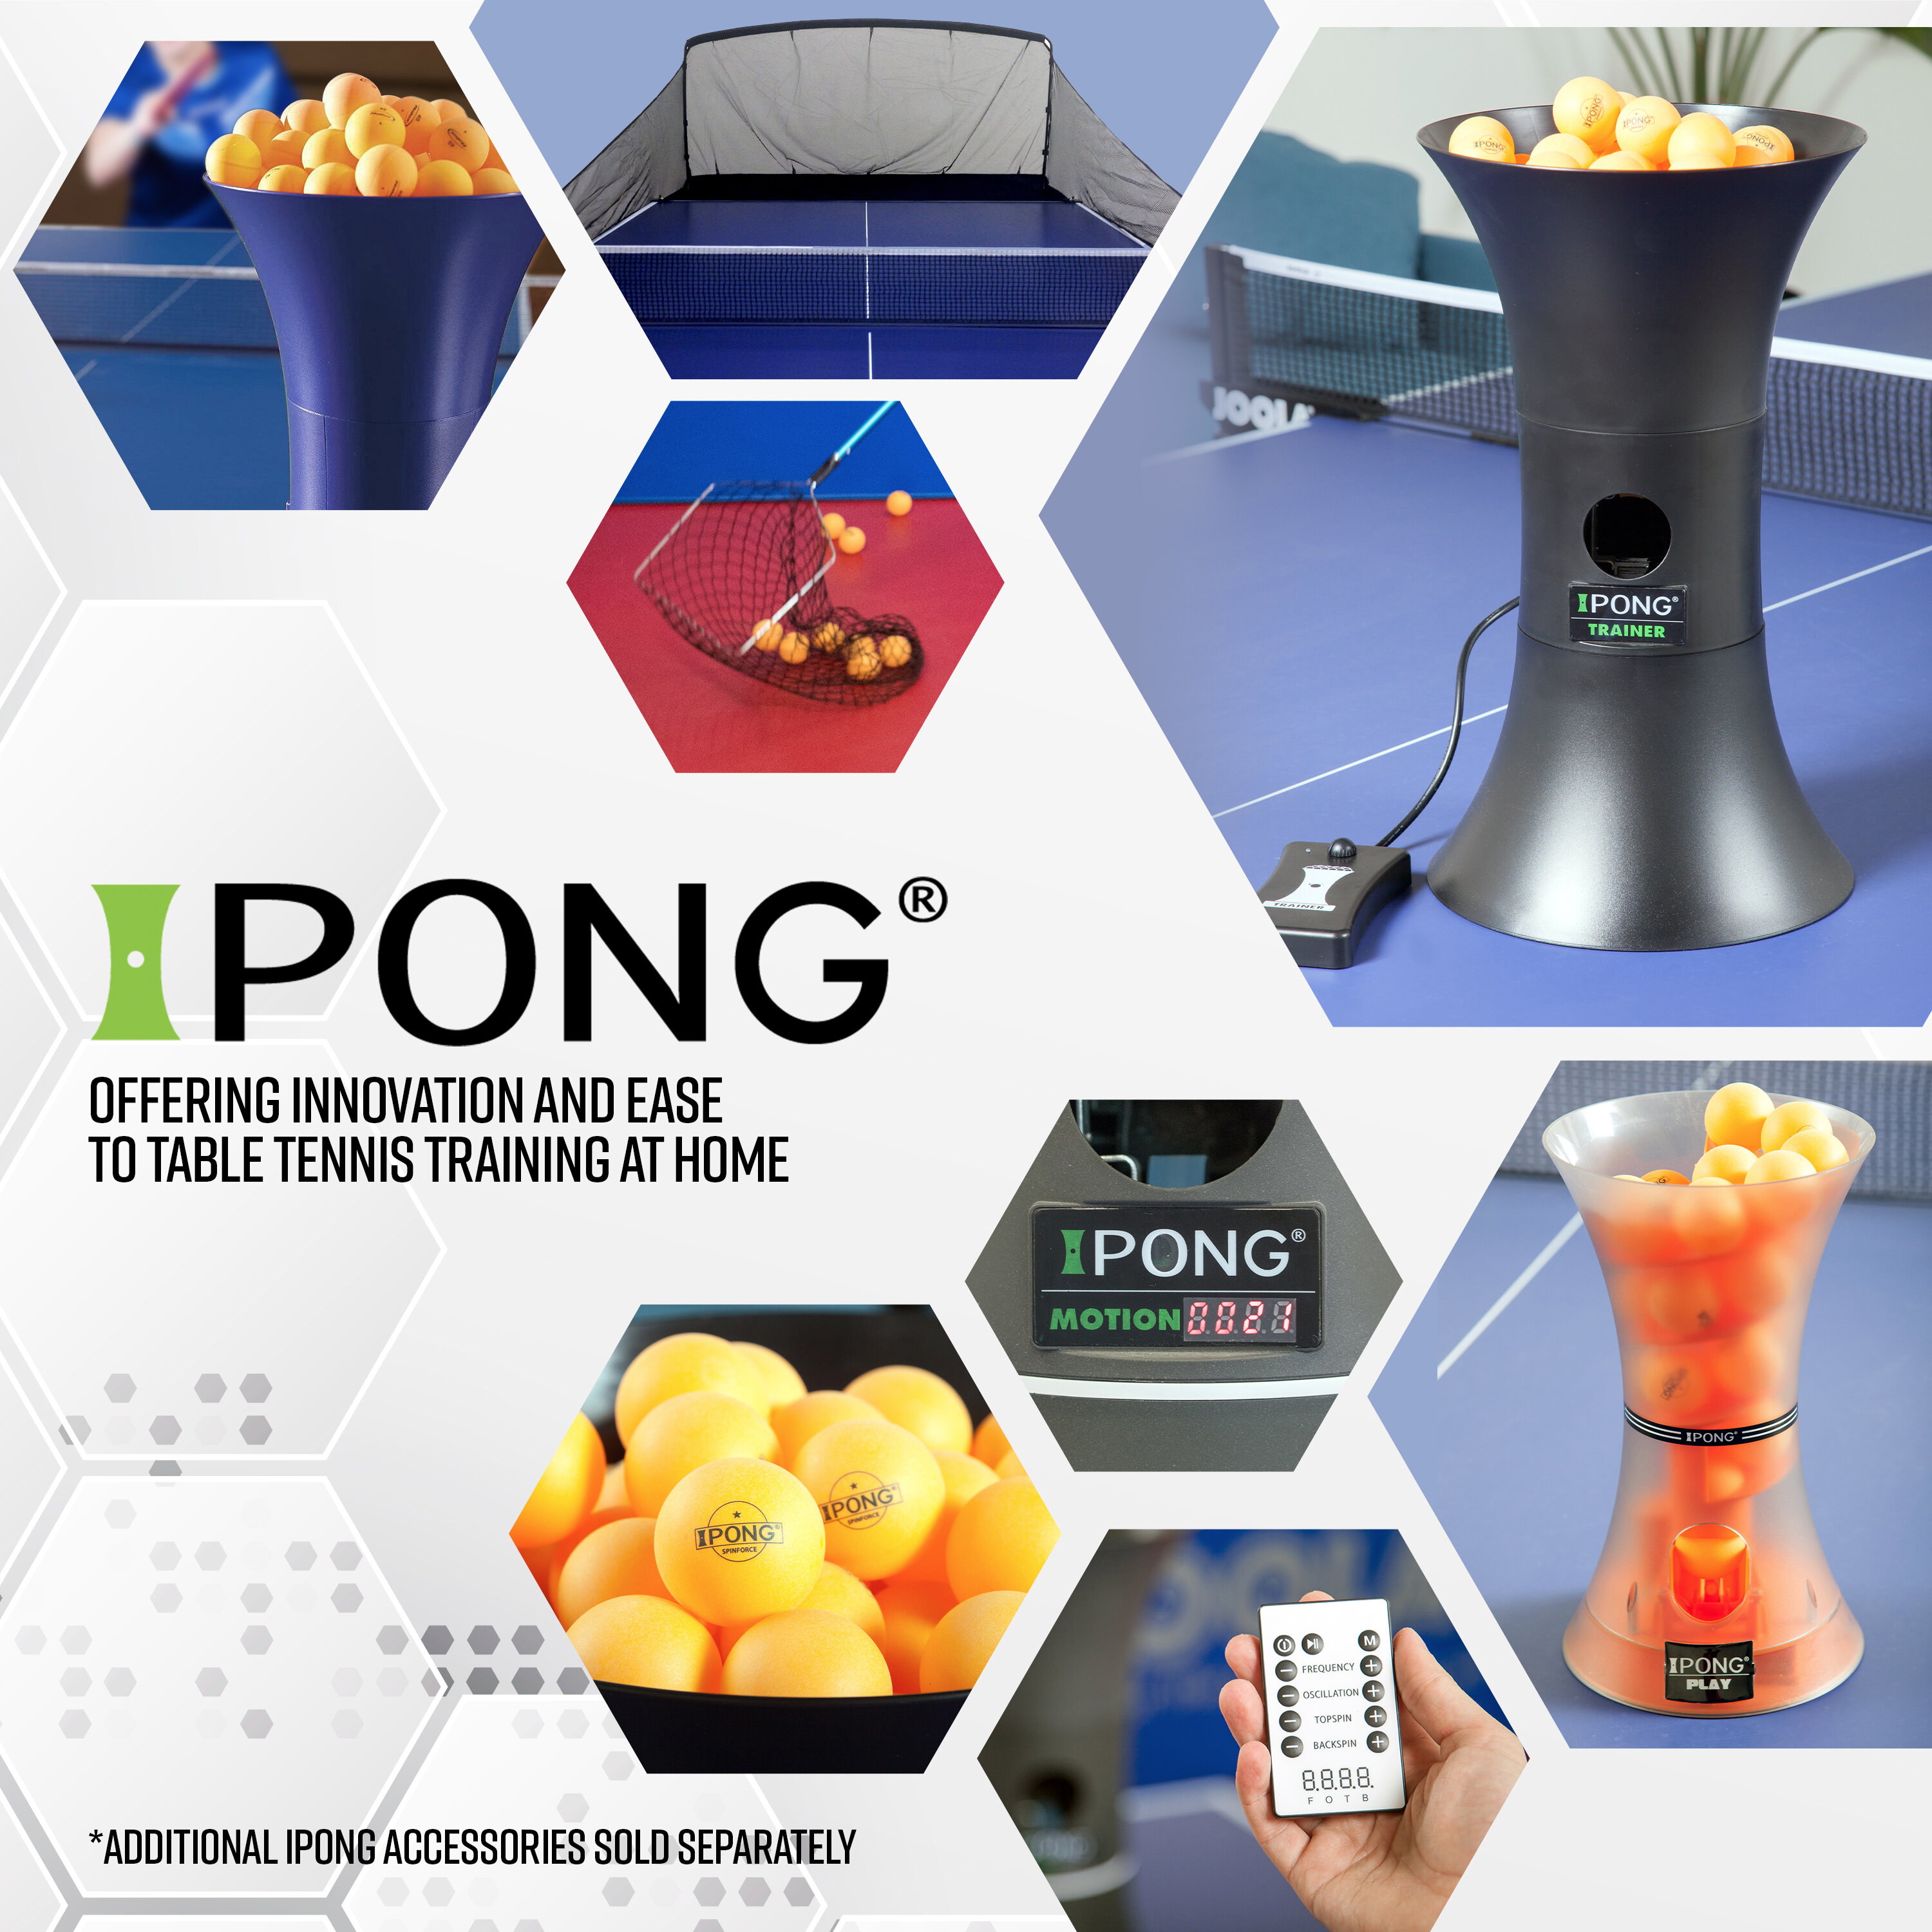 iPong V300 Solo Table Tennis Training Robot w Wireless Remote NEW IMPROVED MODEL 